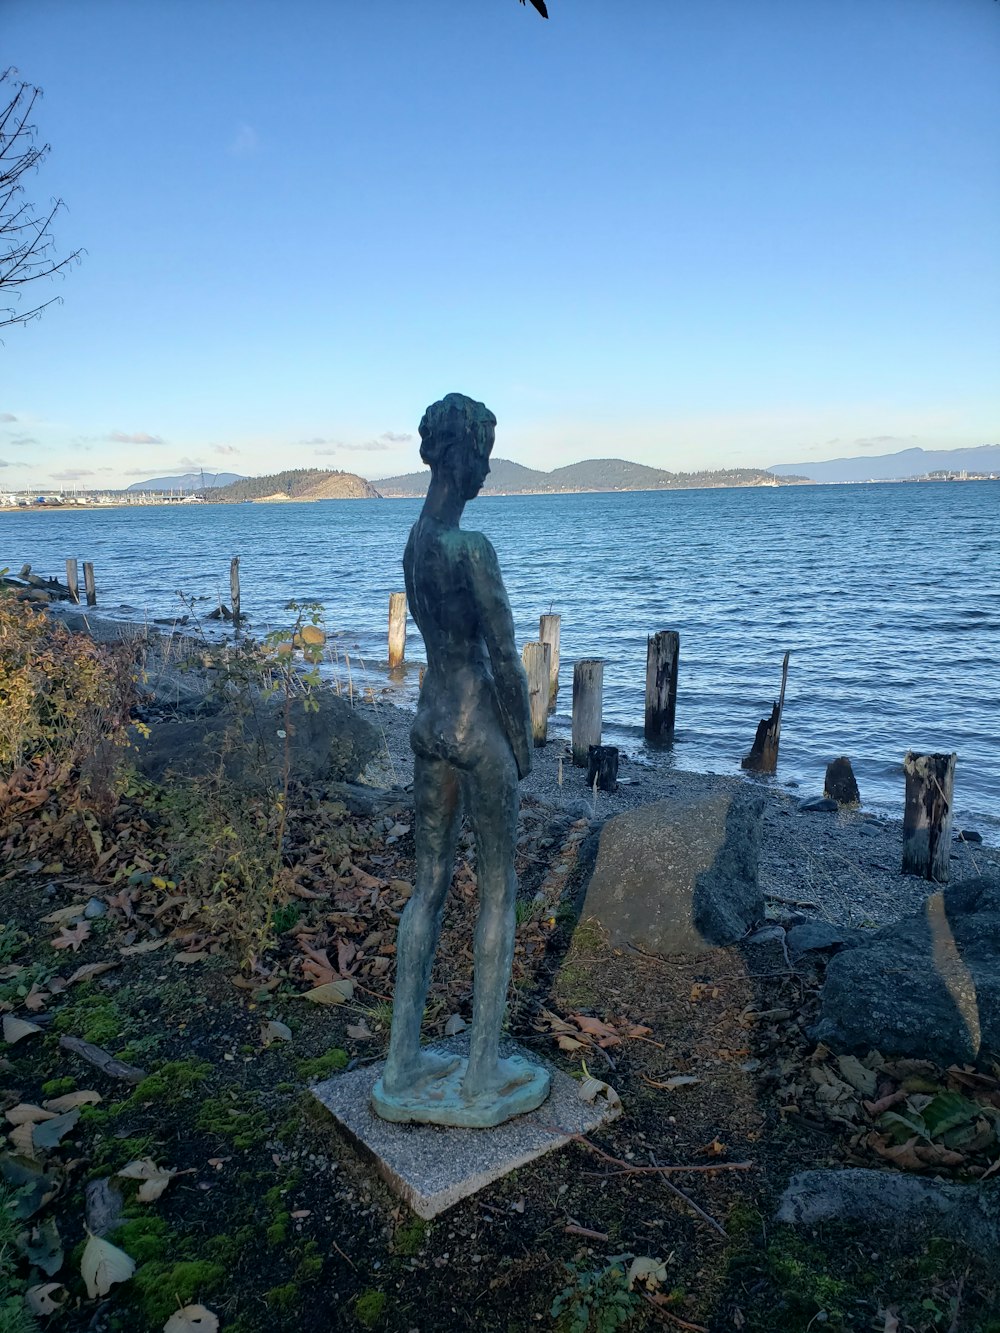 a statue of a man standing next to a body of water